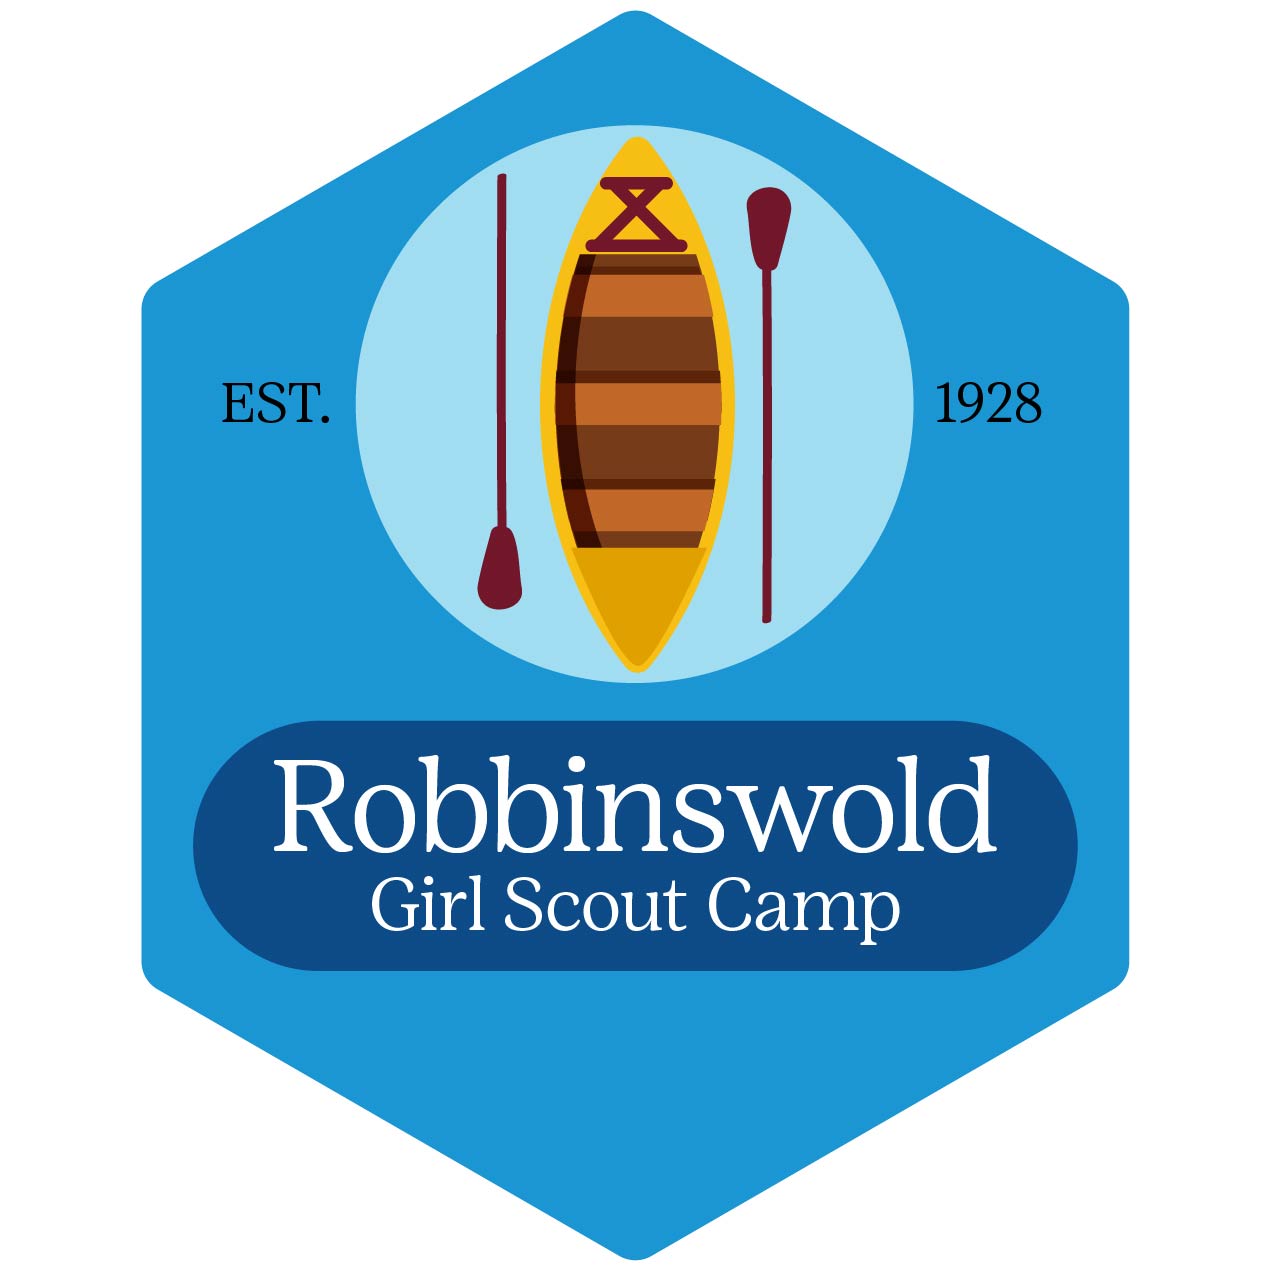 An illustration of a canoe and two paddles is set against a blue shape. White text reads, "Robbinswold Girl Scout Camp." Black text reads, "Est. 1928."